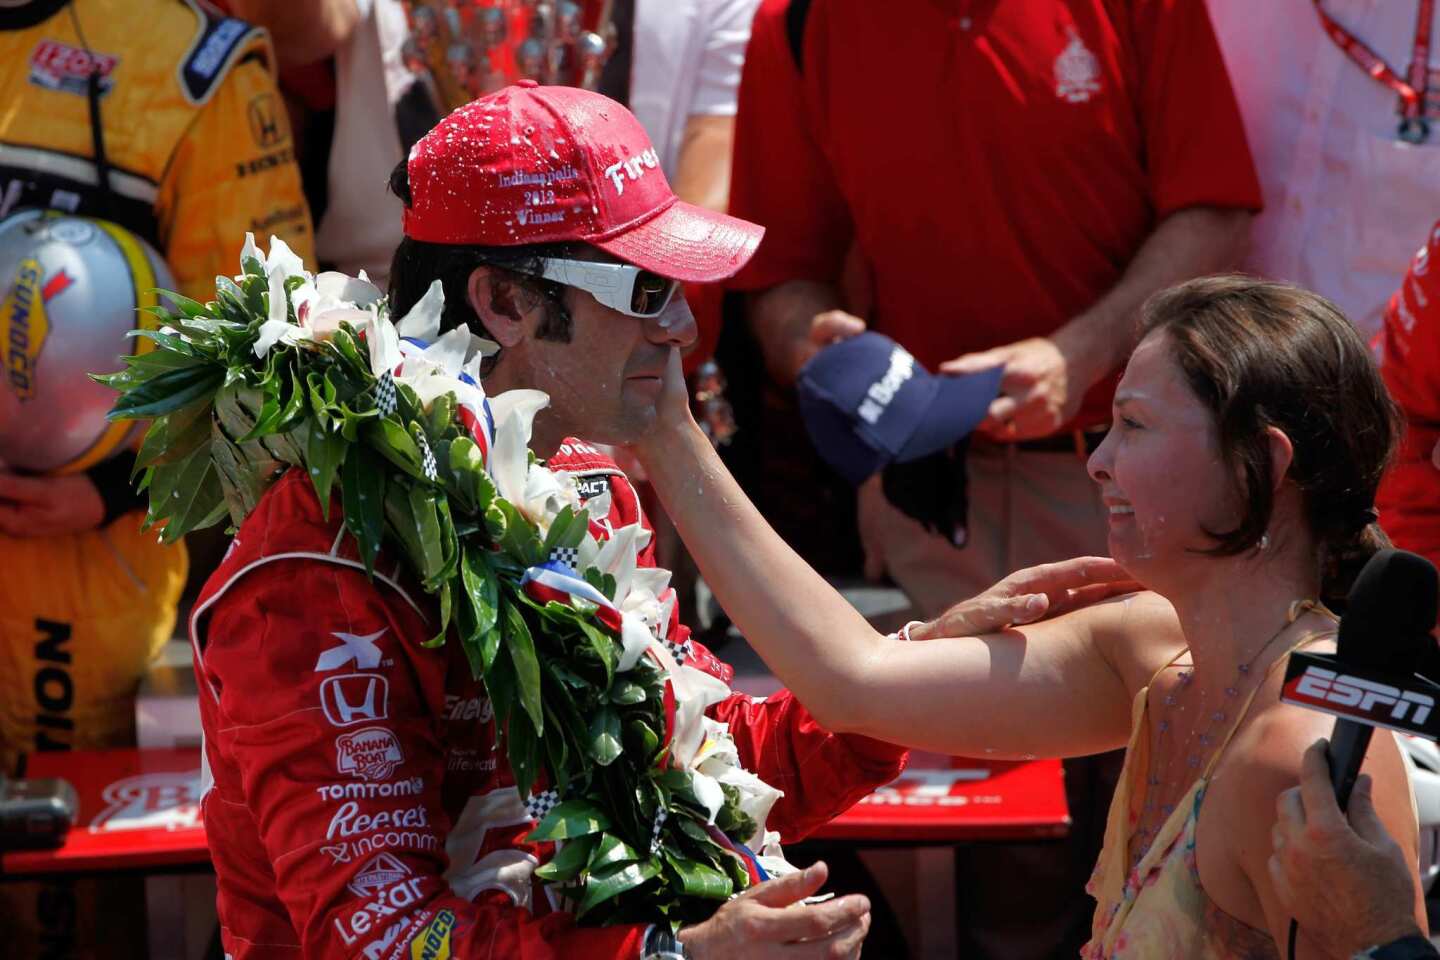 Dario Franchitti shares an emotional moment with wife Ashley Judd after winning the Indianapolis 500 on Sunday.